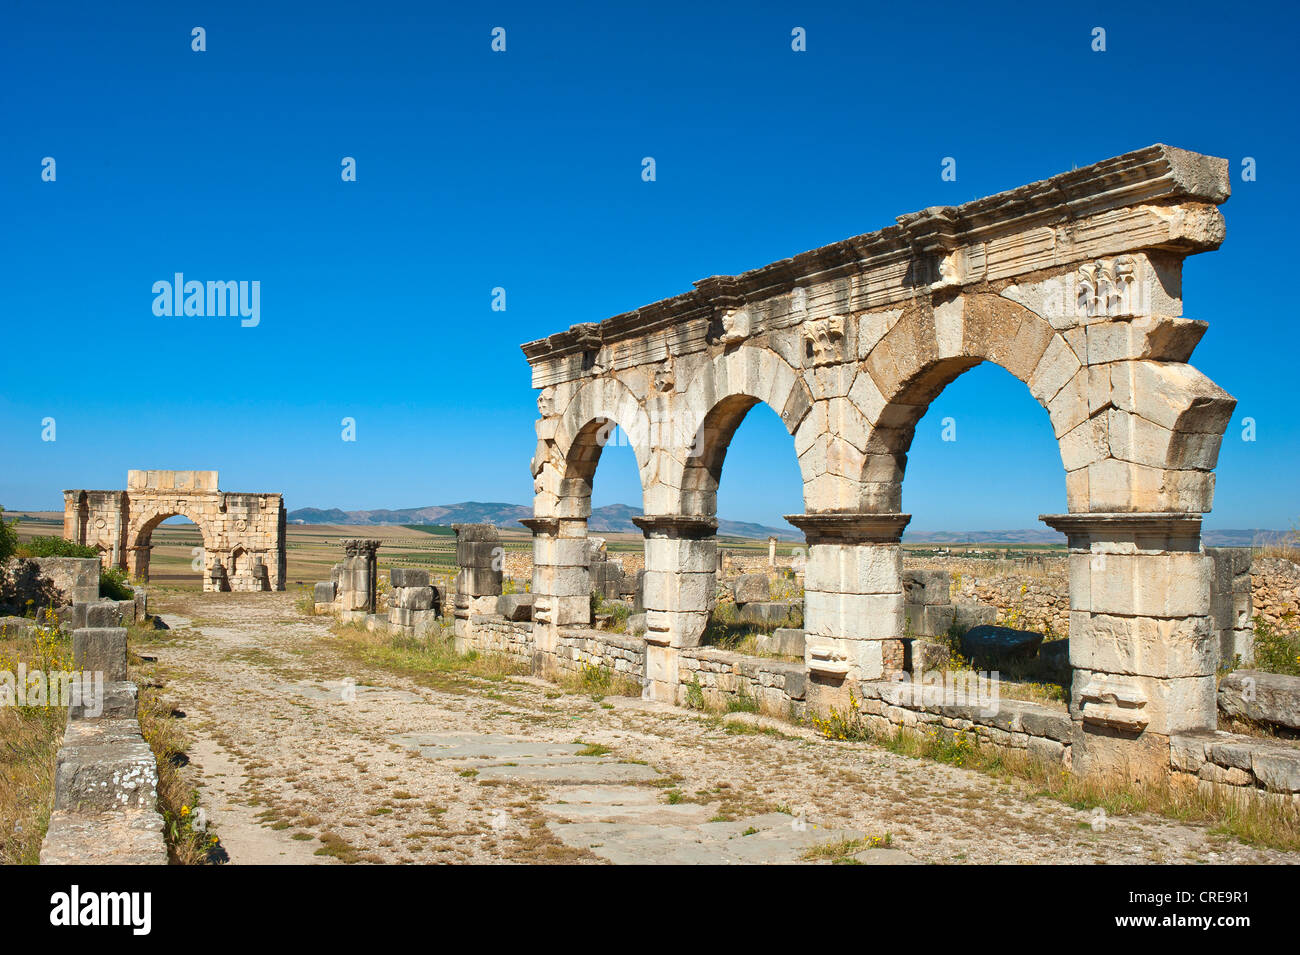 Roman ruins with triumphal arch of Caracalla, ancient residential city of Volubilis, northern Morocco, Africa Stock Photo